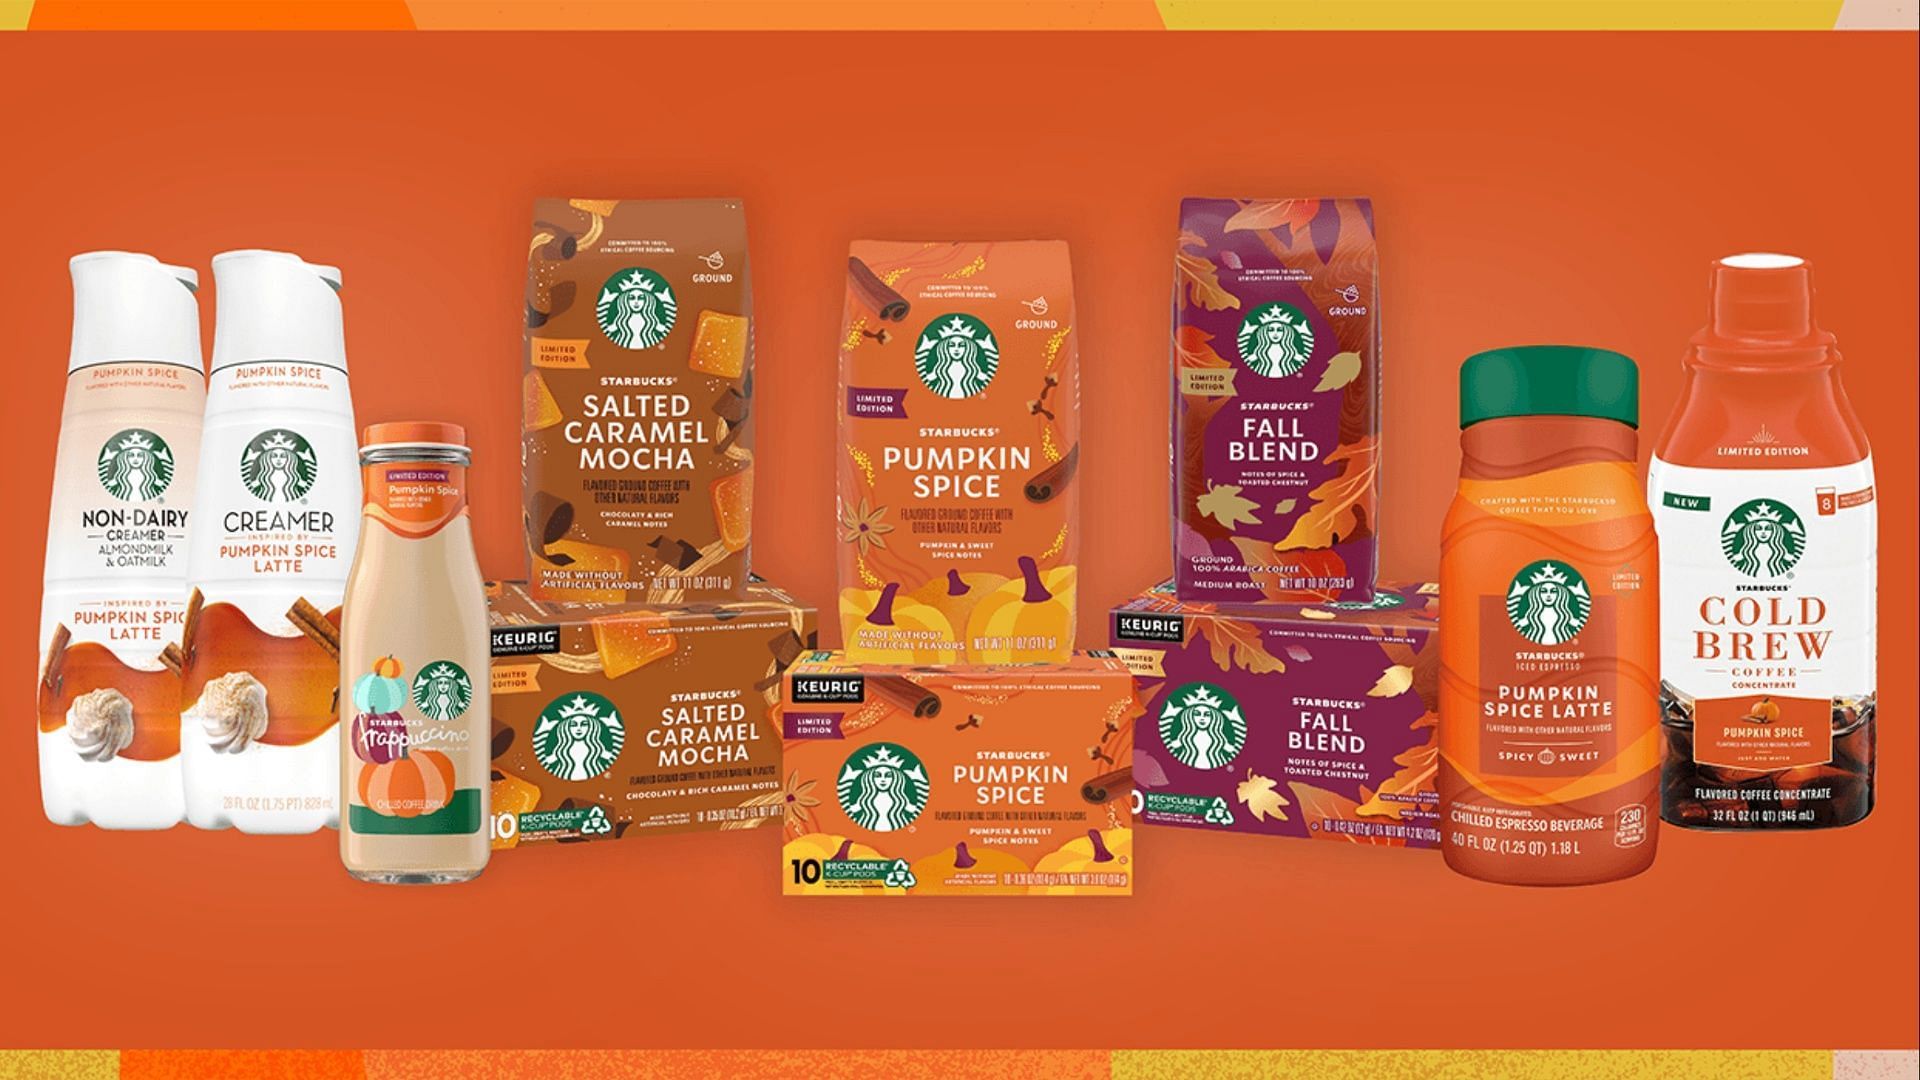 Starbucks introduces new Pumpkin Spice line-up for fall (Image via Starbucks)